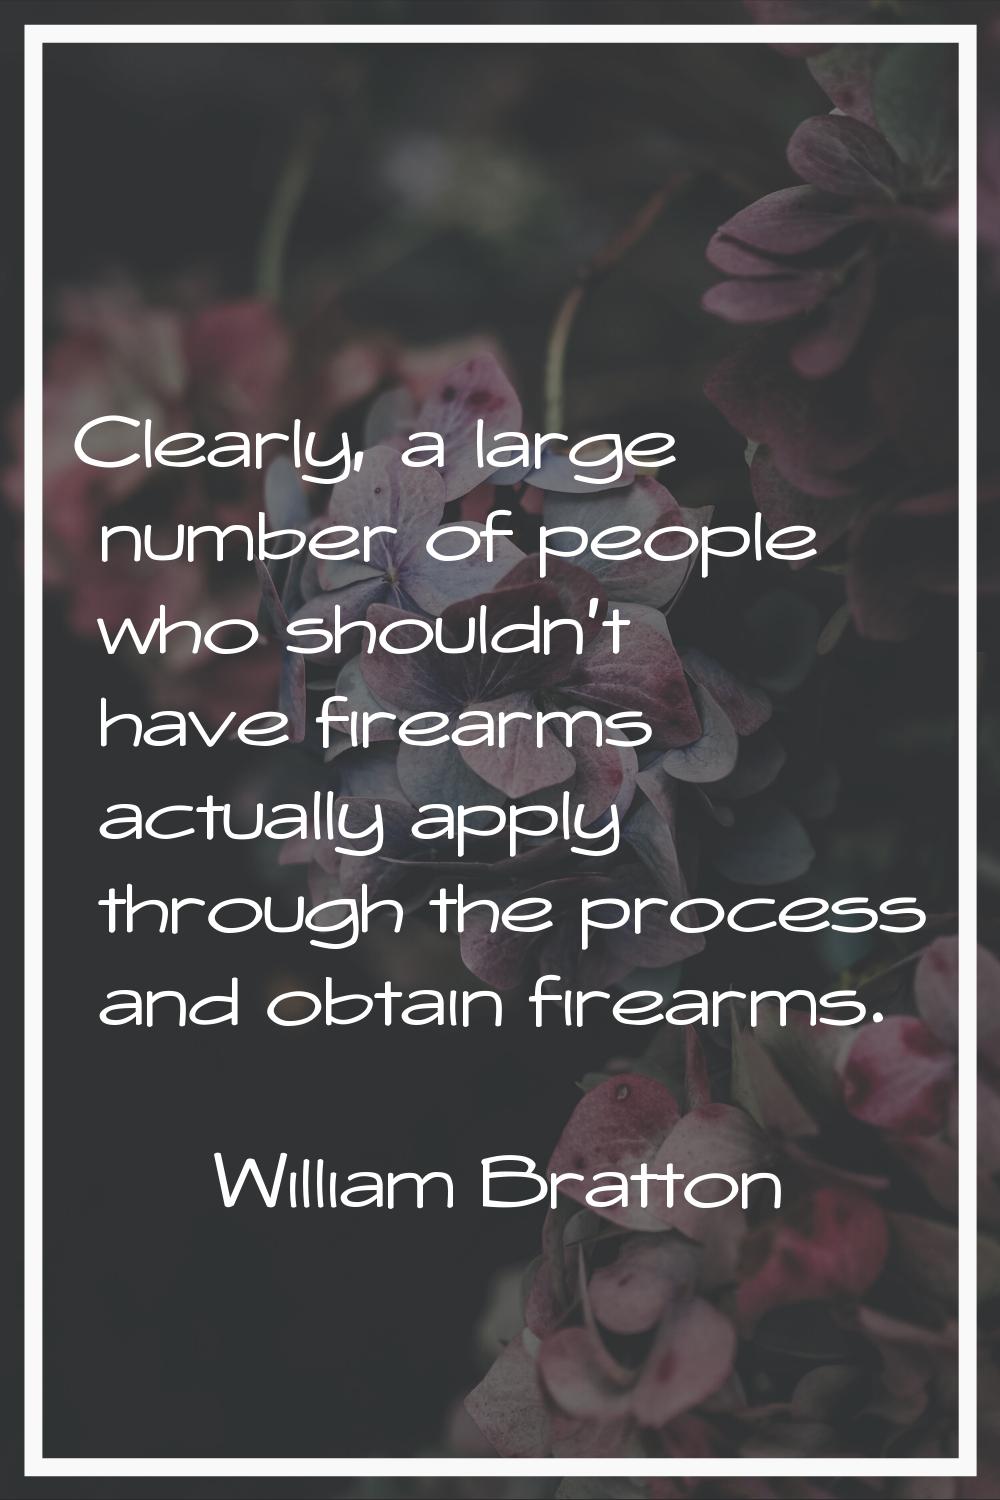 Clearly, a large number of people who shouldn't have firearms actually apply through the process an